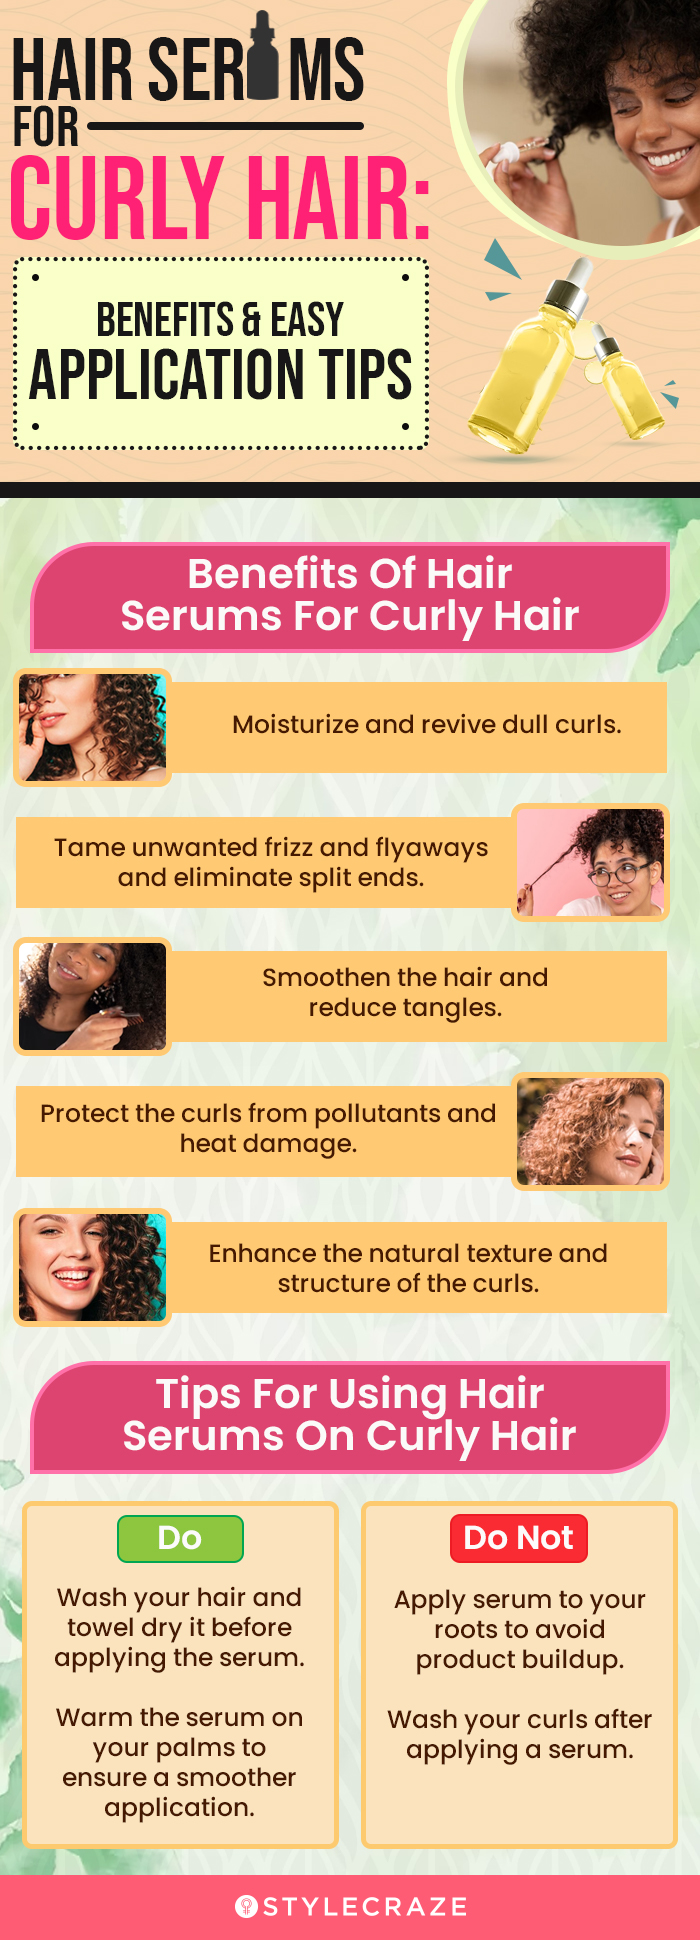 Hair Serums For Curly Hair: Benefits & Easy Application Tips